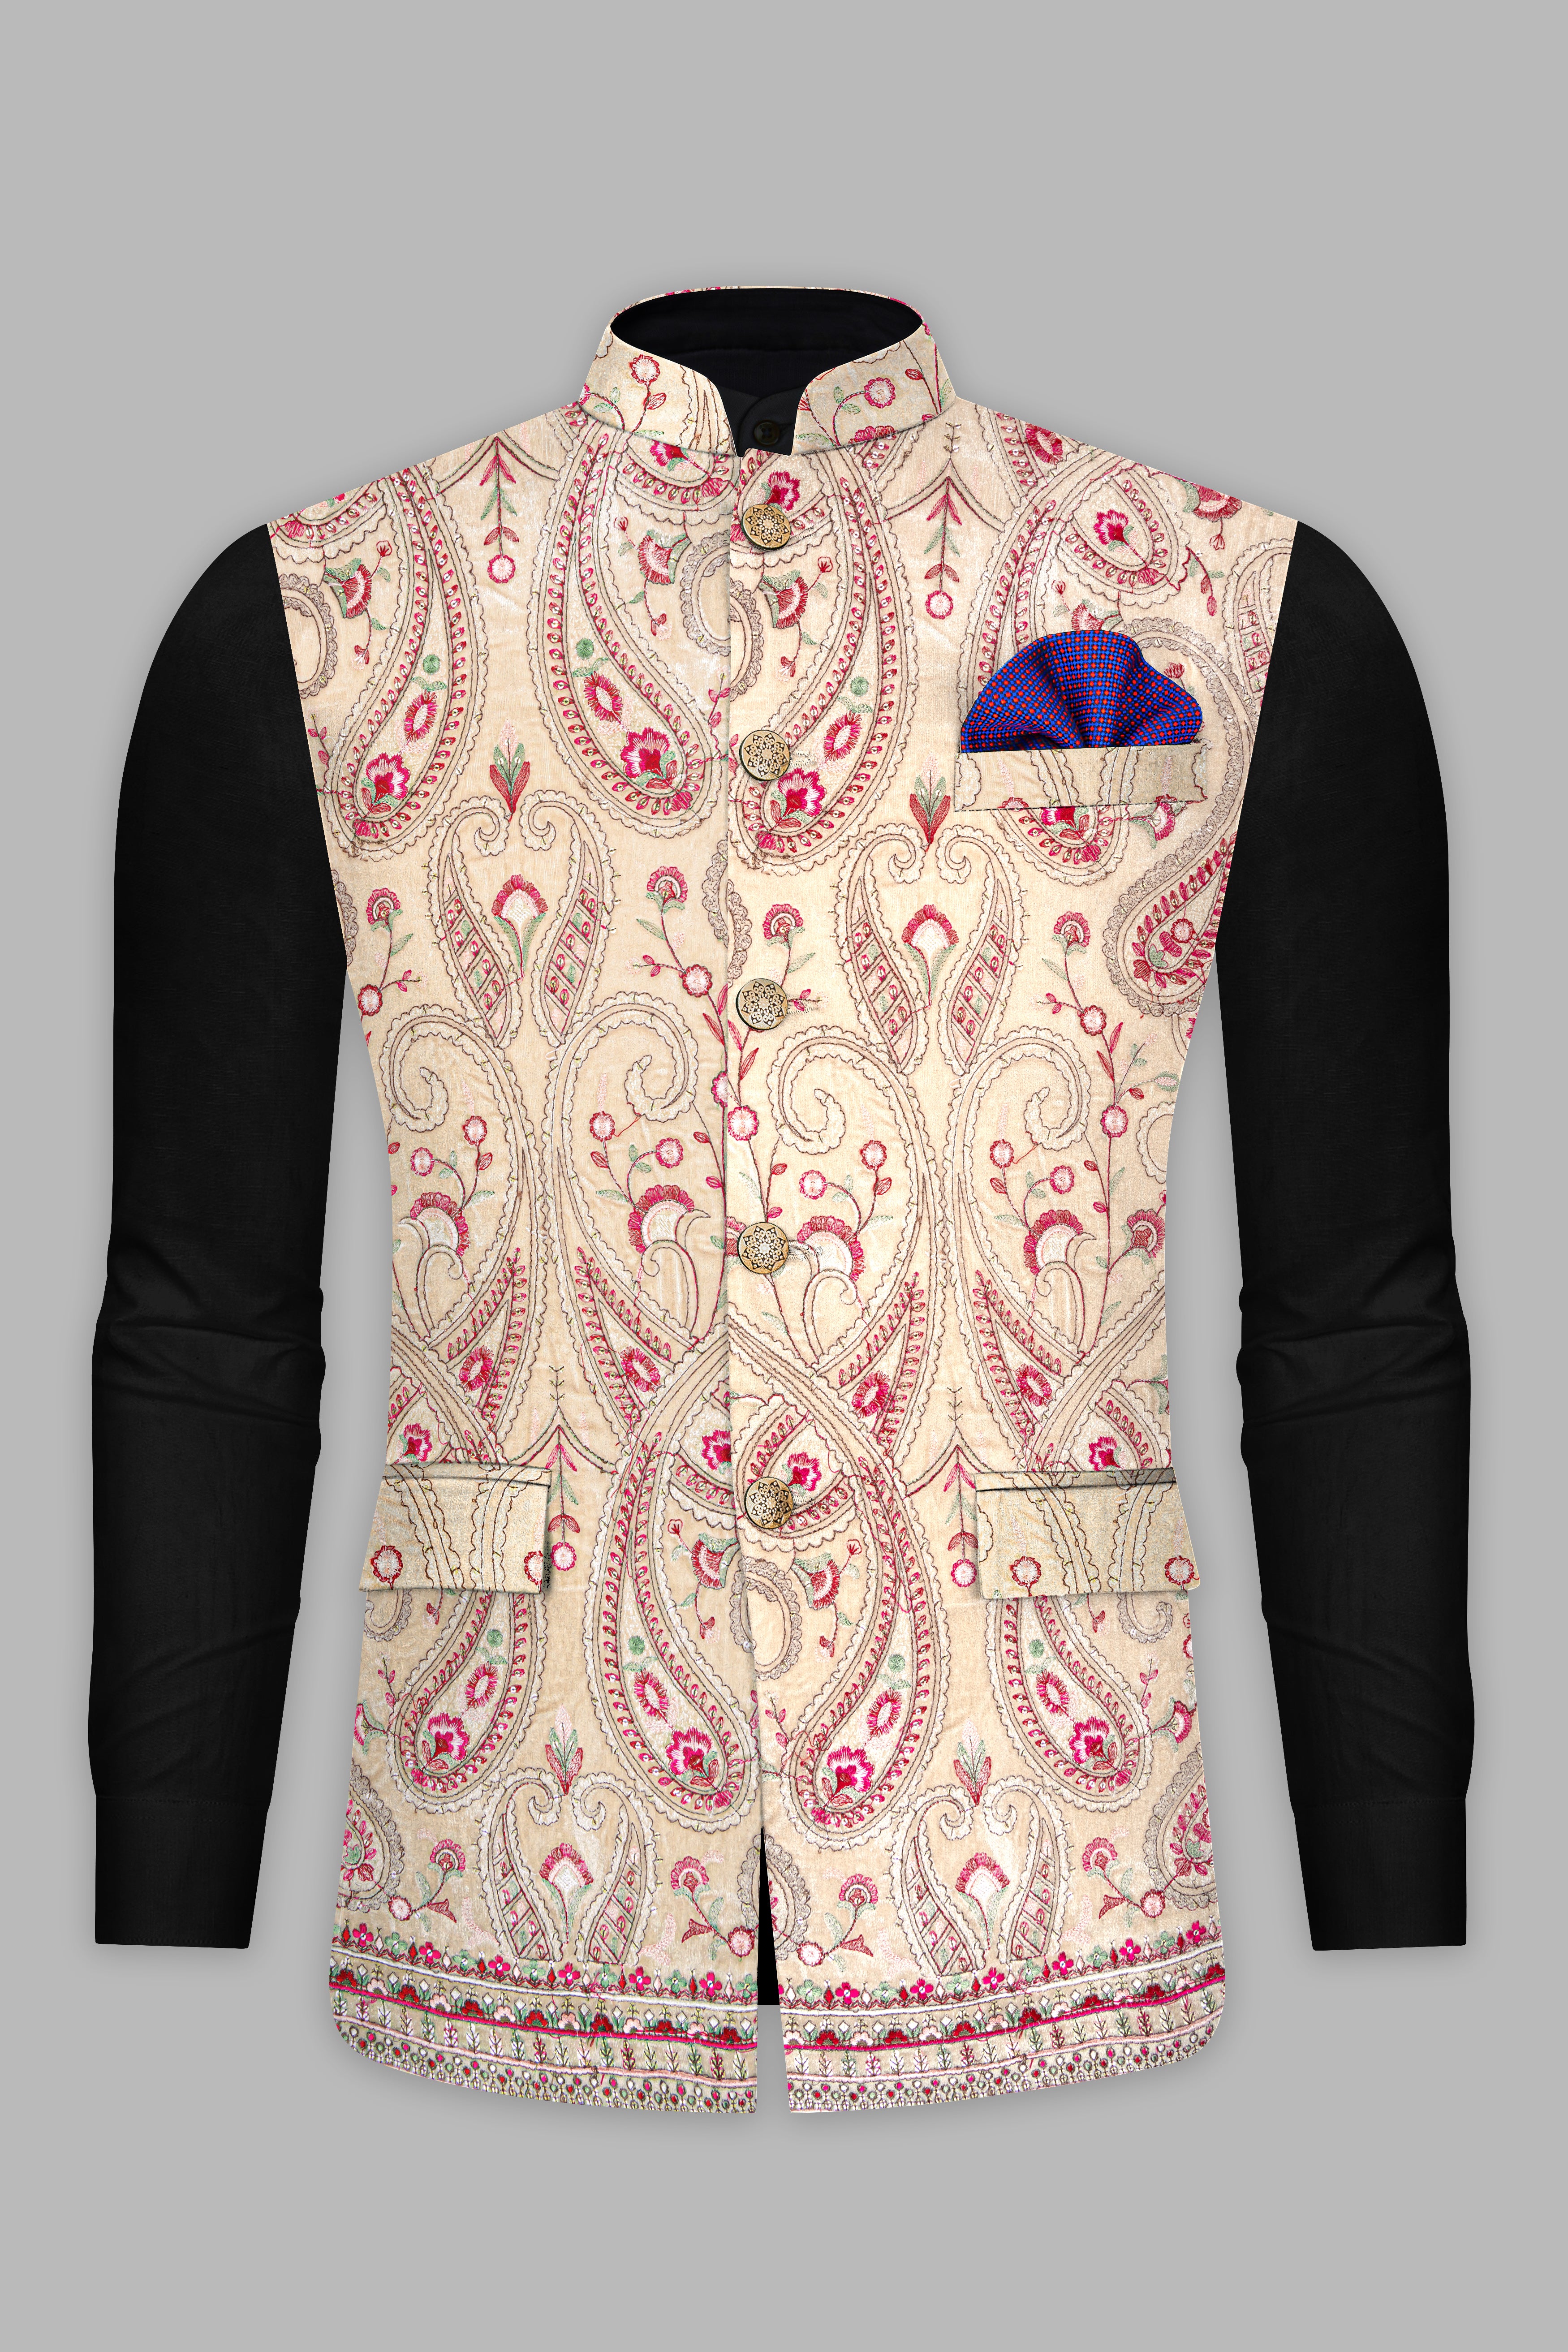 Bisque Brown and Cardinal Pink Floral Thread Embroidered Nehru Jacket WC3504-36,  WC3504-38,  WC3504-40,  WC3504-42,  WC3504-44,  WC3504-46,  WC3504-48,  WC3504-50,  WC3504-52,  WC3504-54,  WC3504-56,  WC3504-58,  WC3504-60